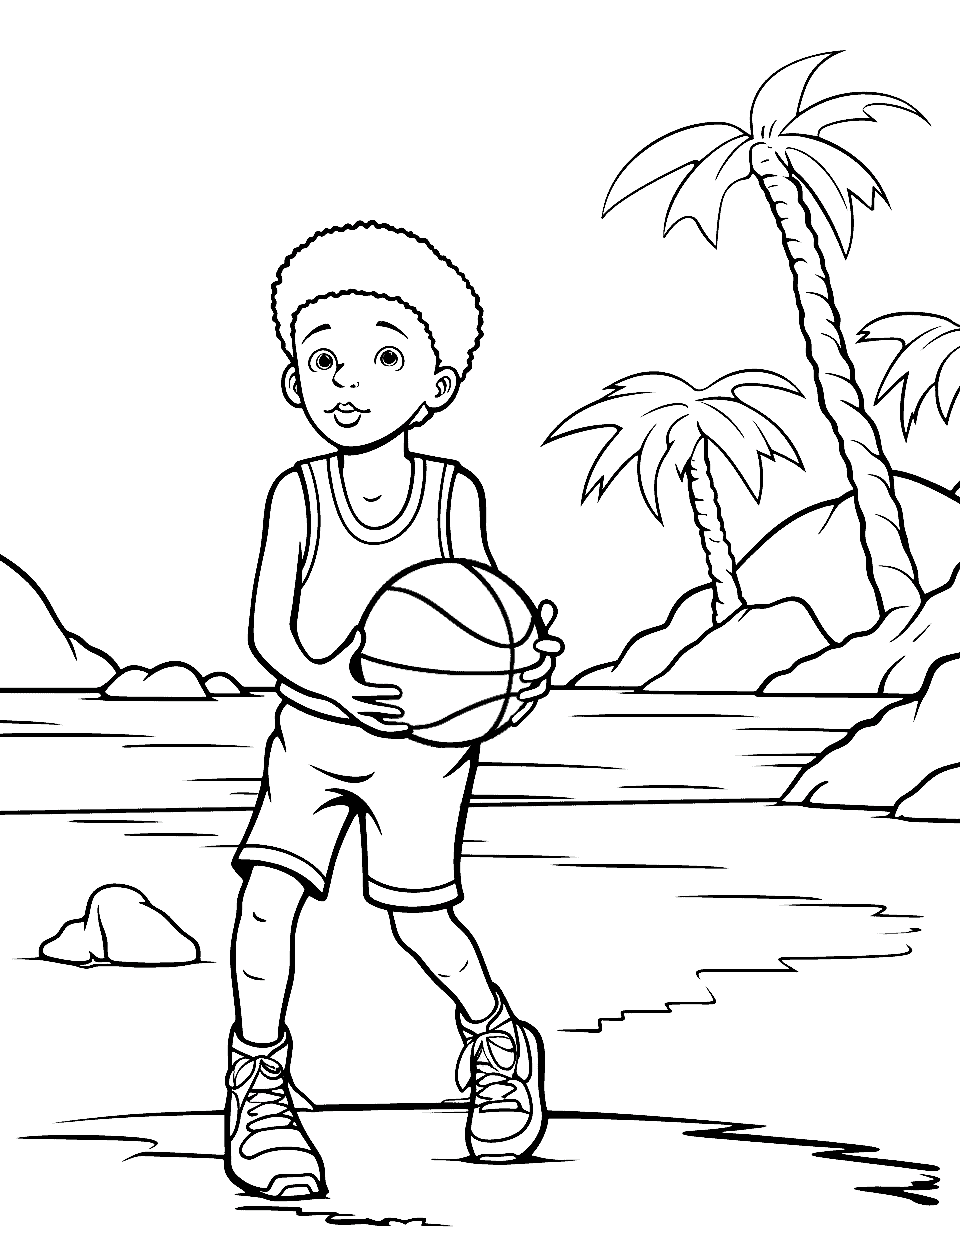 Tropical Island Basketball Coloring Page - A child playing basketball on a beach with a tropical island backdrop.